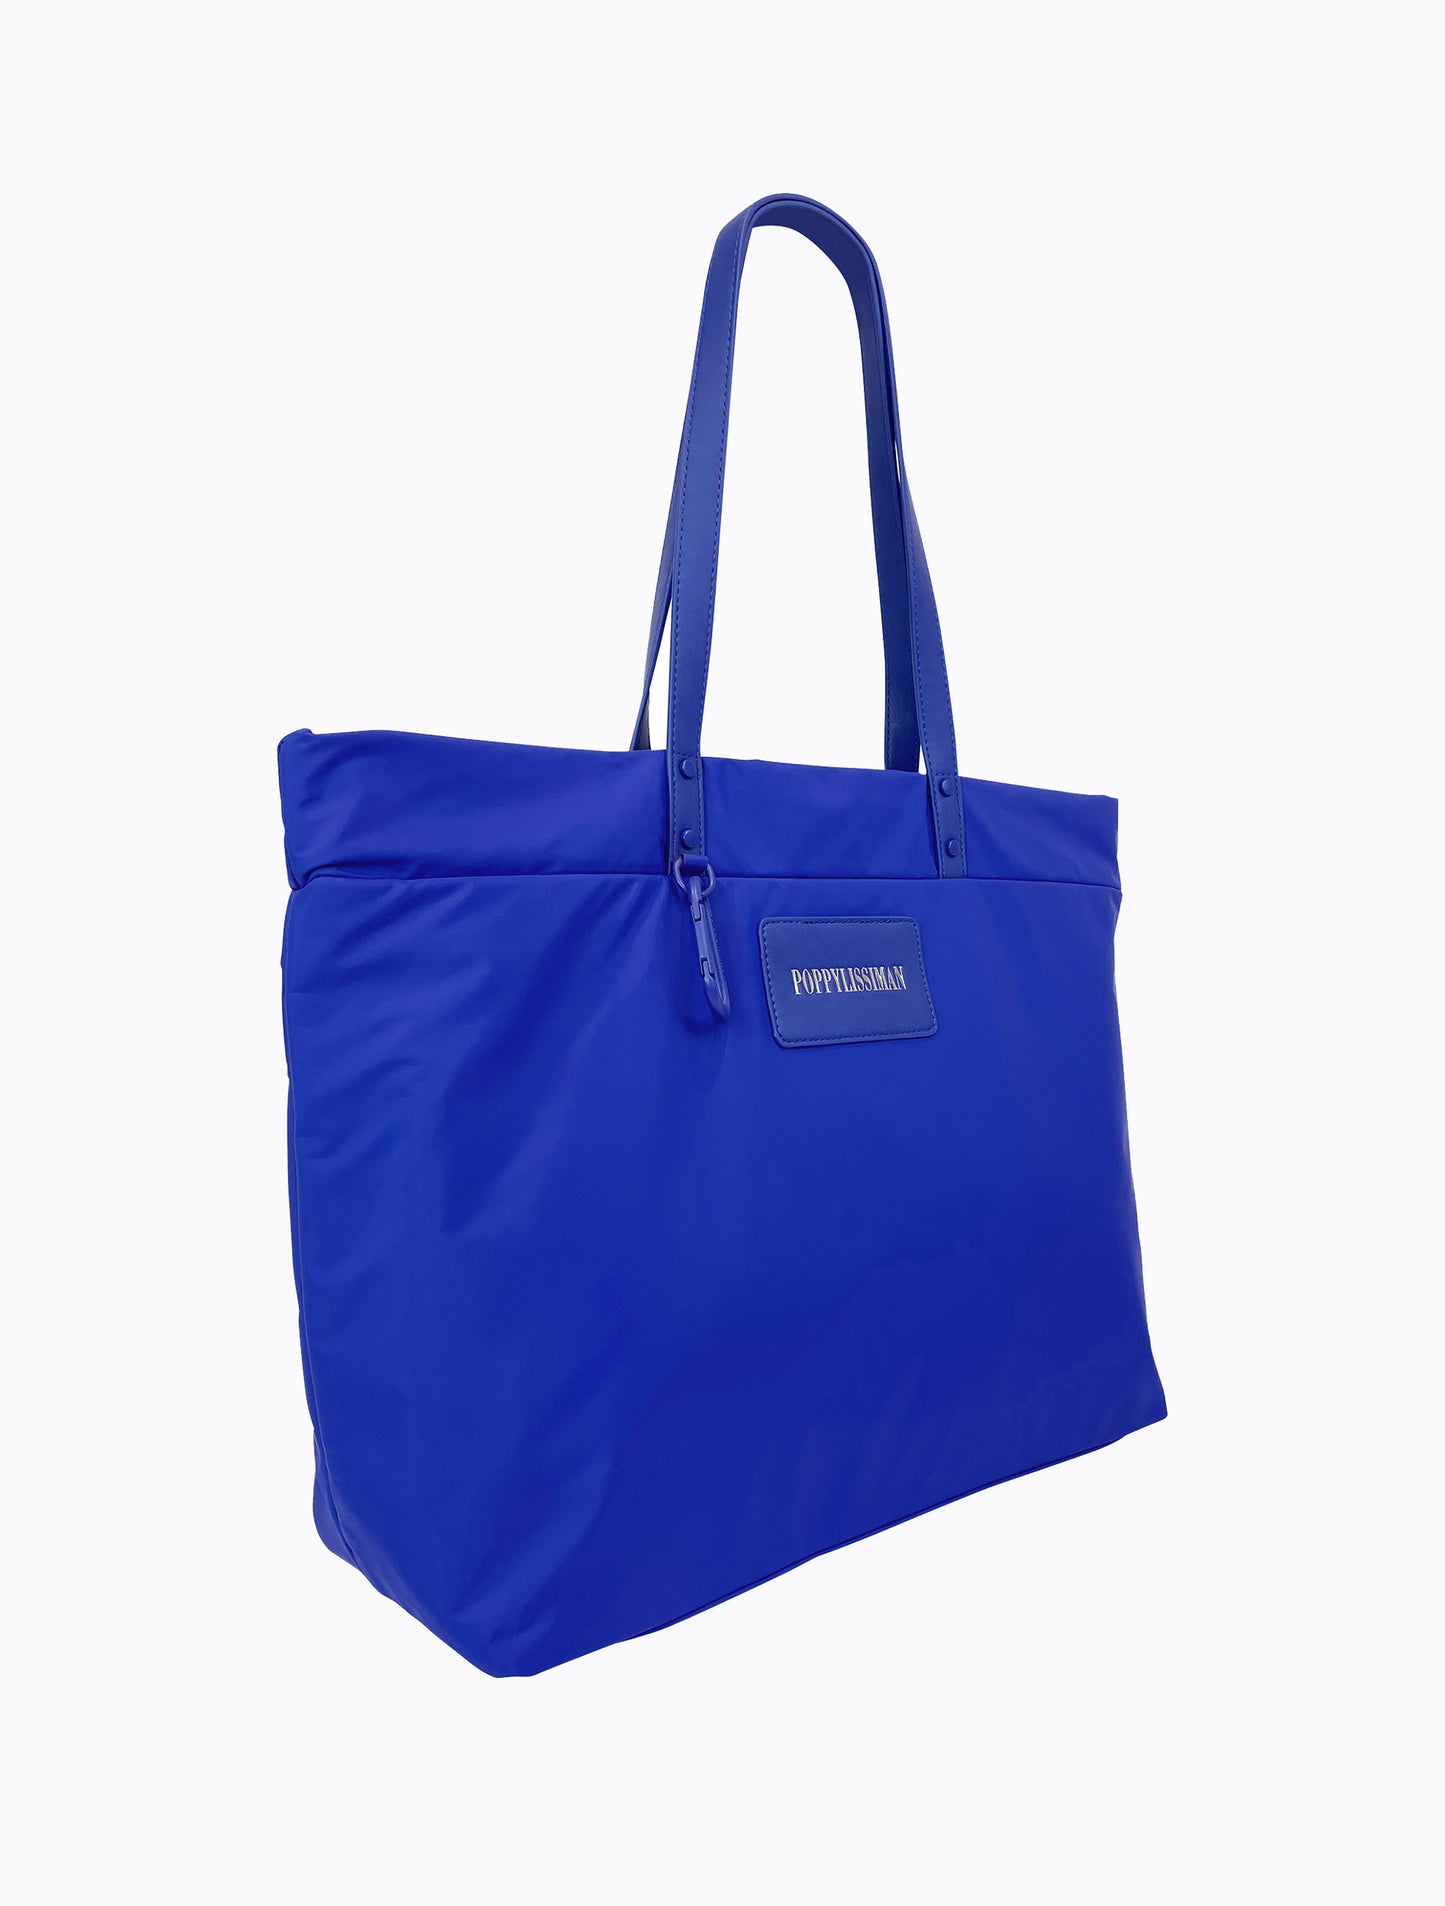 Teeto Tote - Electric Blue – Poppy Lissiman